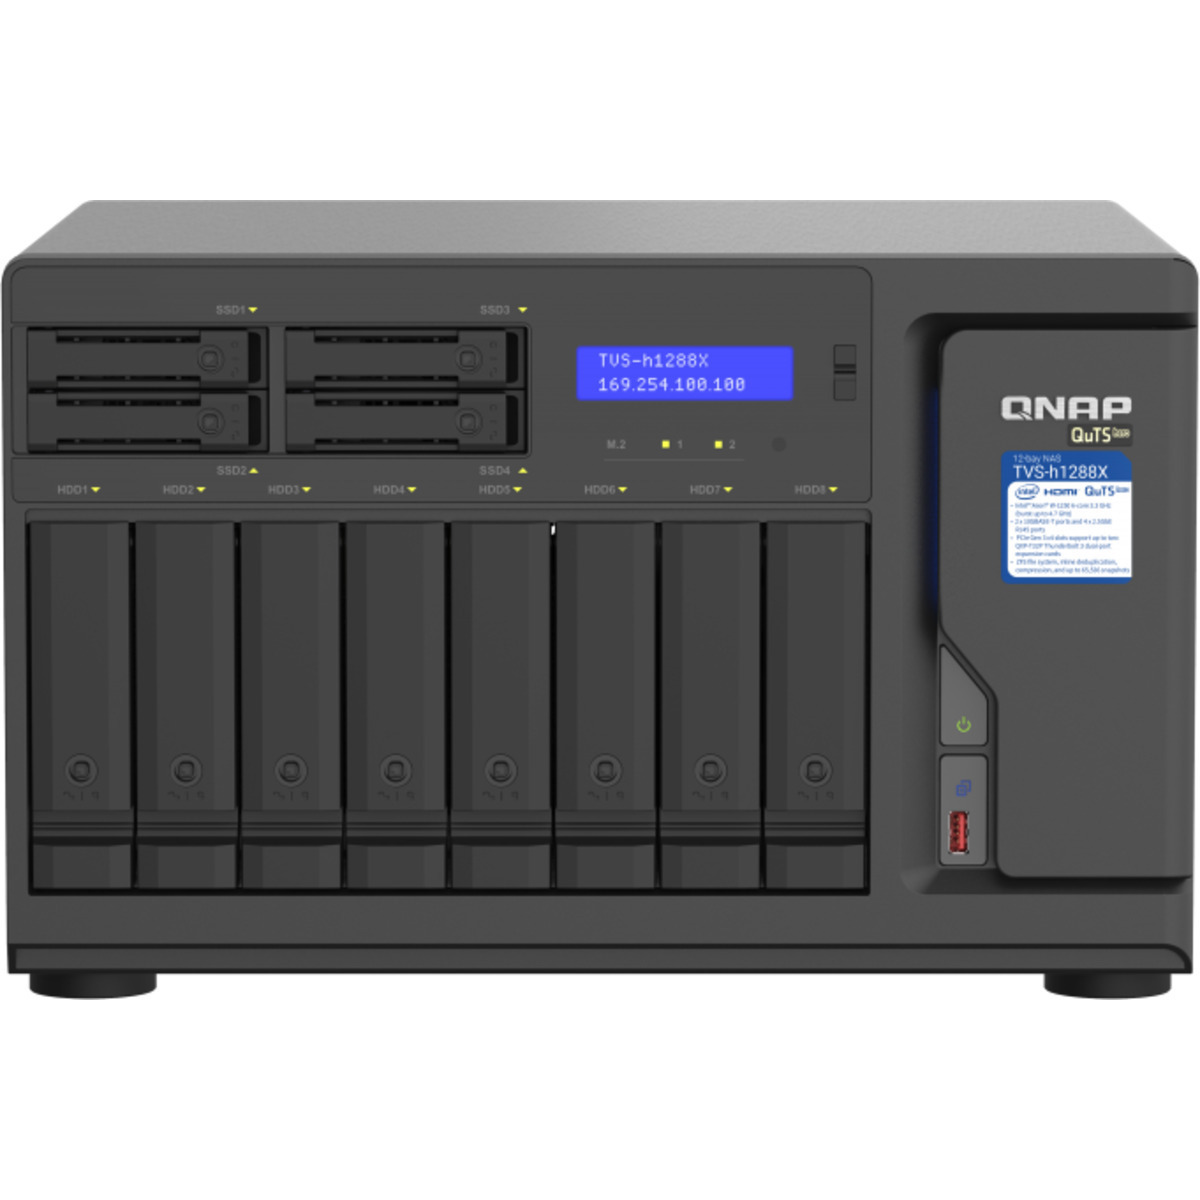 QNAP TVS-h1288X QuTS hero NAS 56tb 8+4-Bay Desktop Multimedia / Power User / Business NAS - Network Attached Storage Device 7x8tb Western Digital Red Plus WD80EFPX 3.5 7200rpm SATA 6Gb/s HDD NAS Class Drives Installed - Burn-In Tested TVS-h1288X QuTS hero NAS